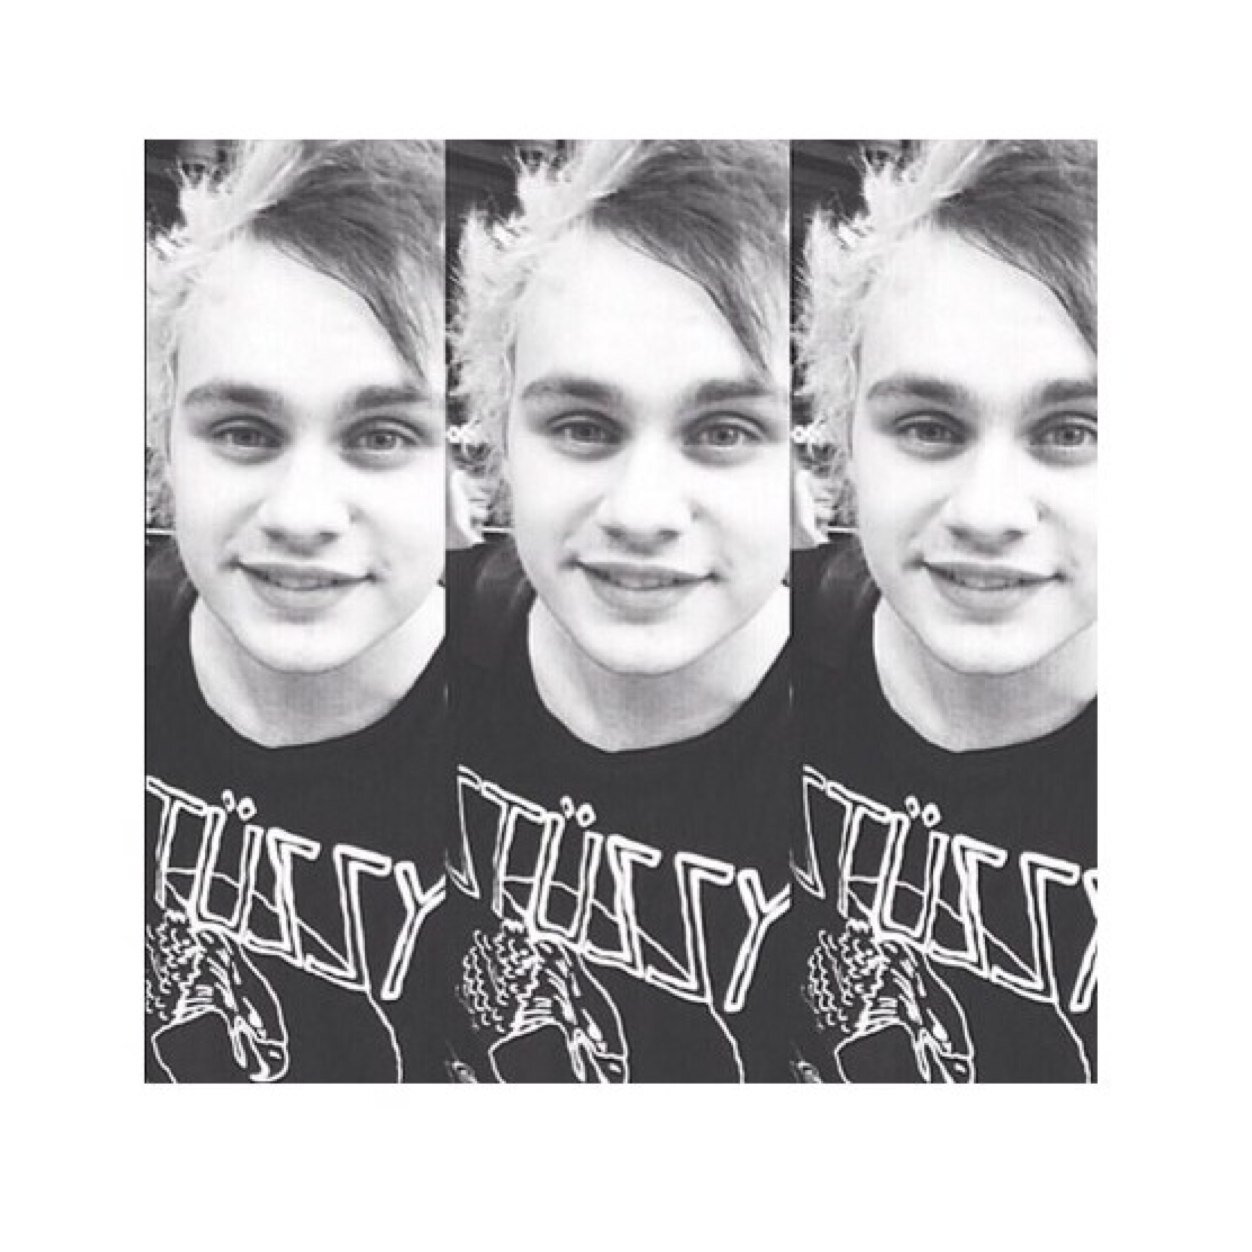 ☪ michael clifford saved me ☪